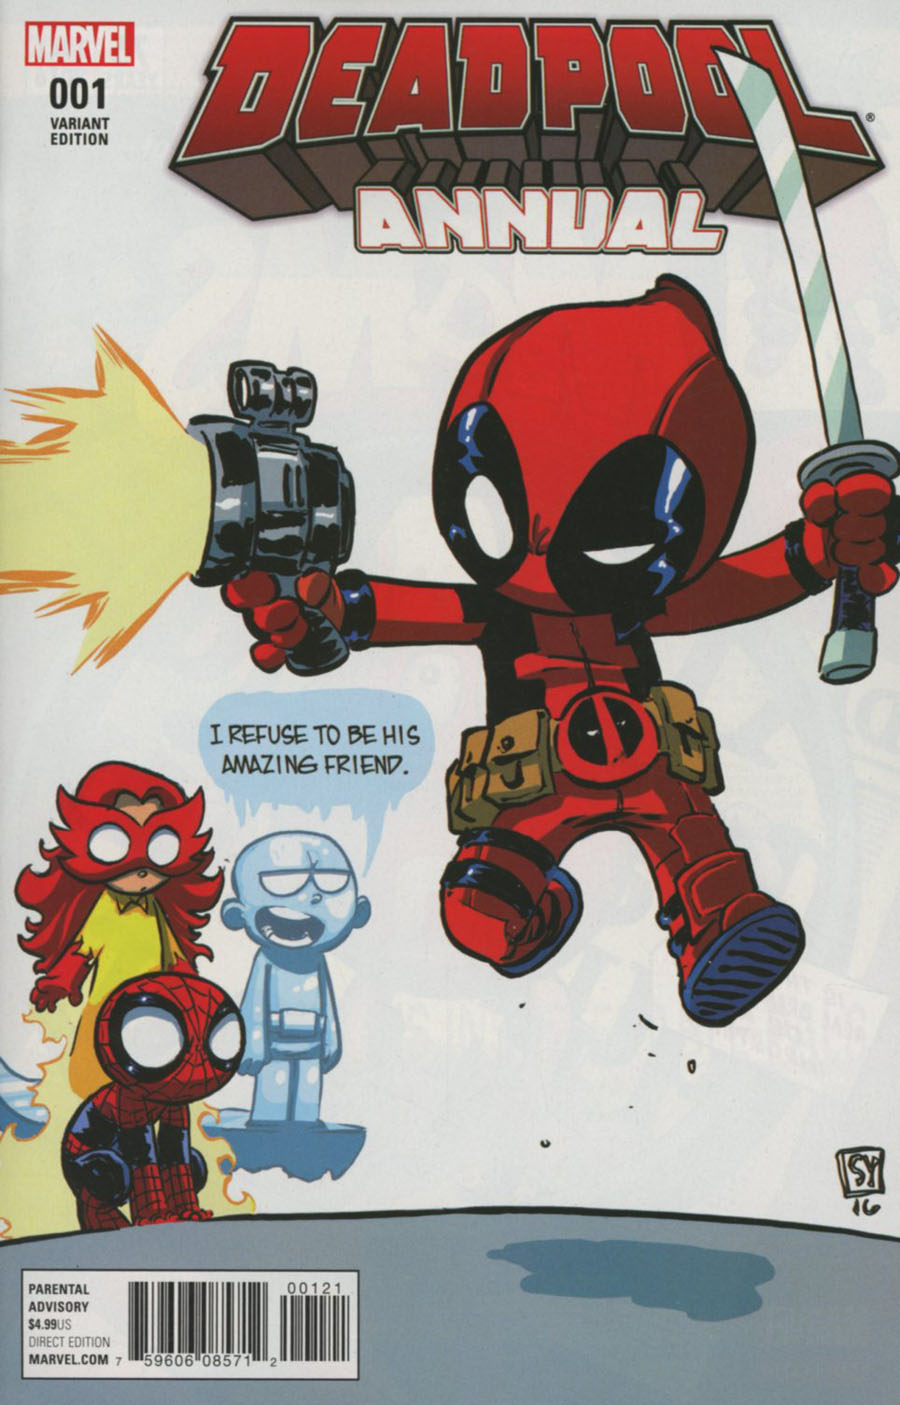 Deadpool Vol 5 Annual #1 Cover C Variant Skottie Young Baby Cover